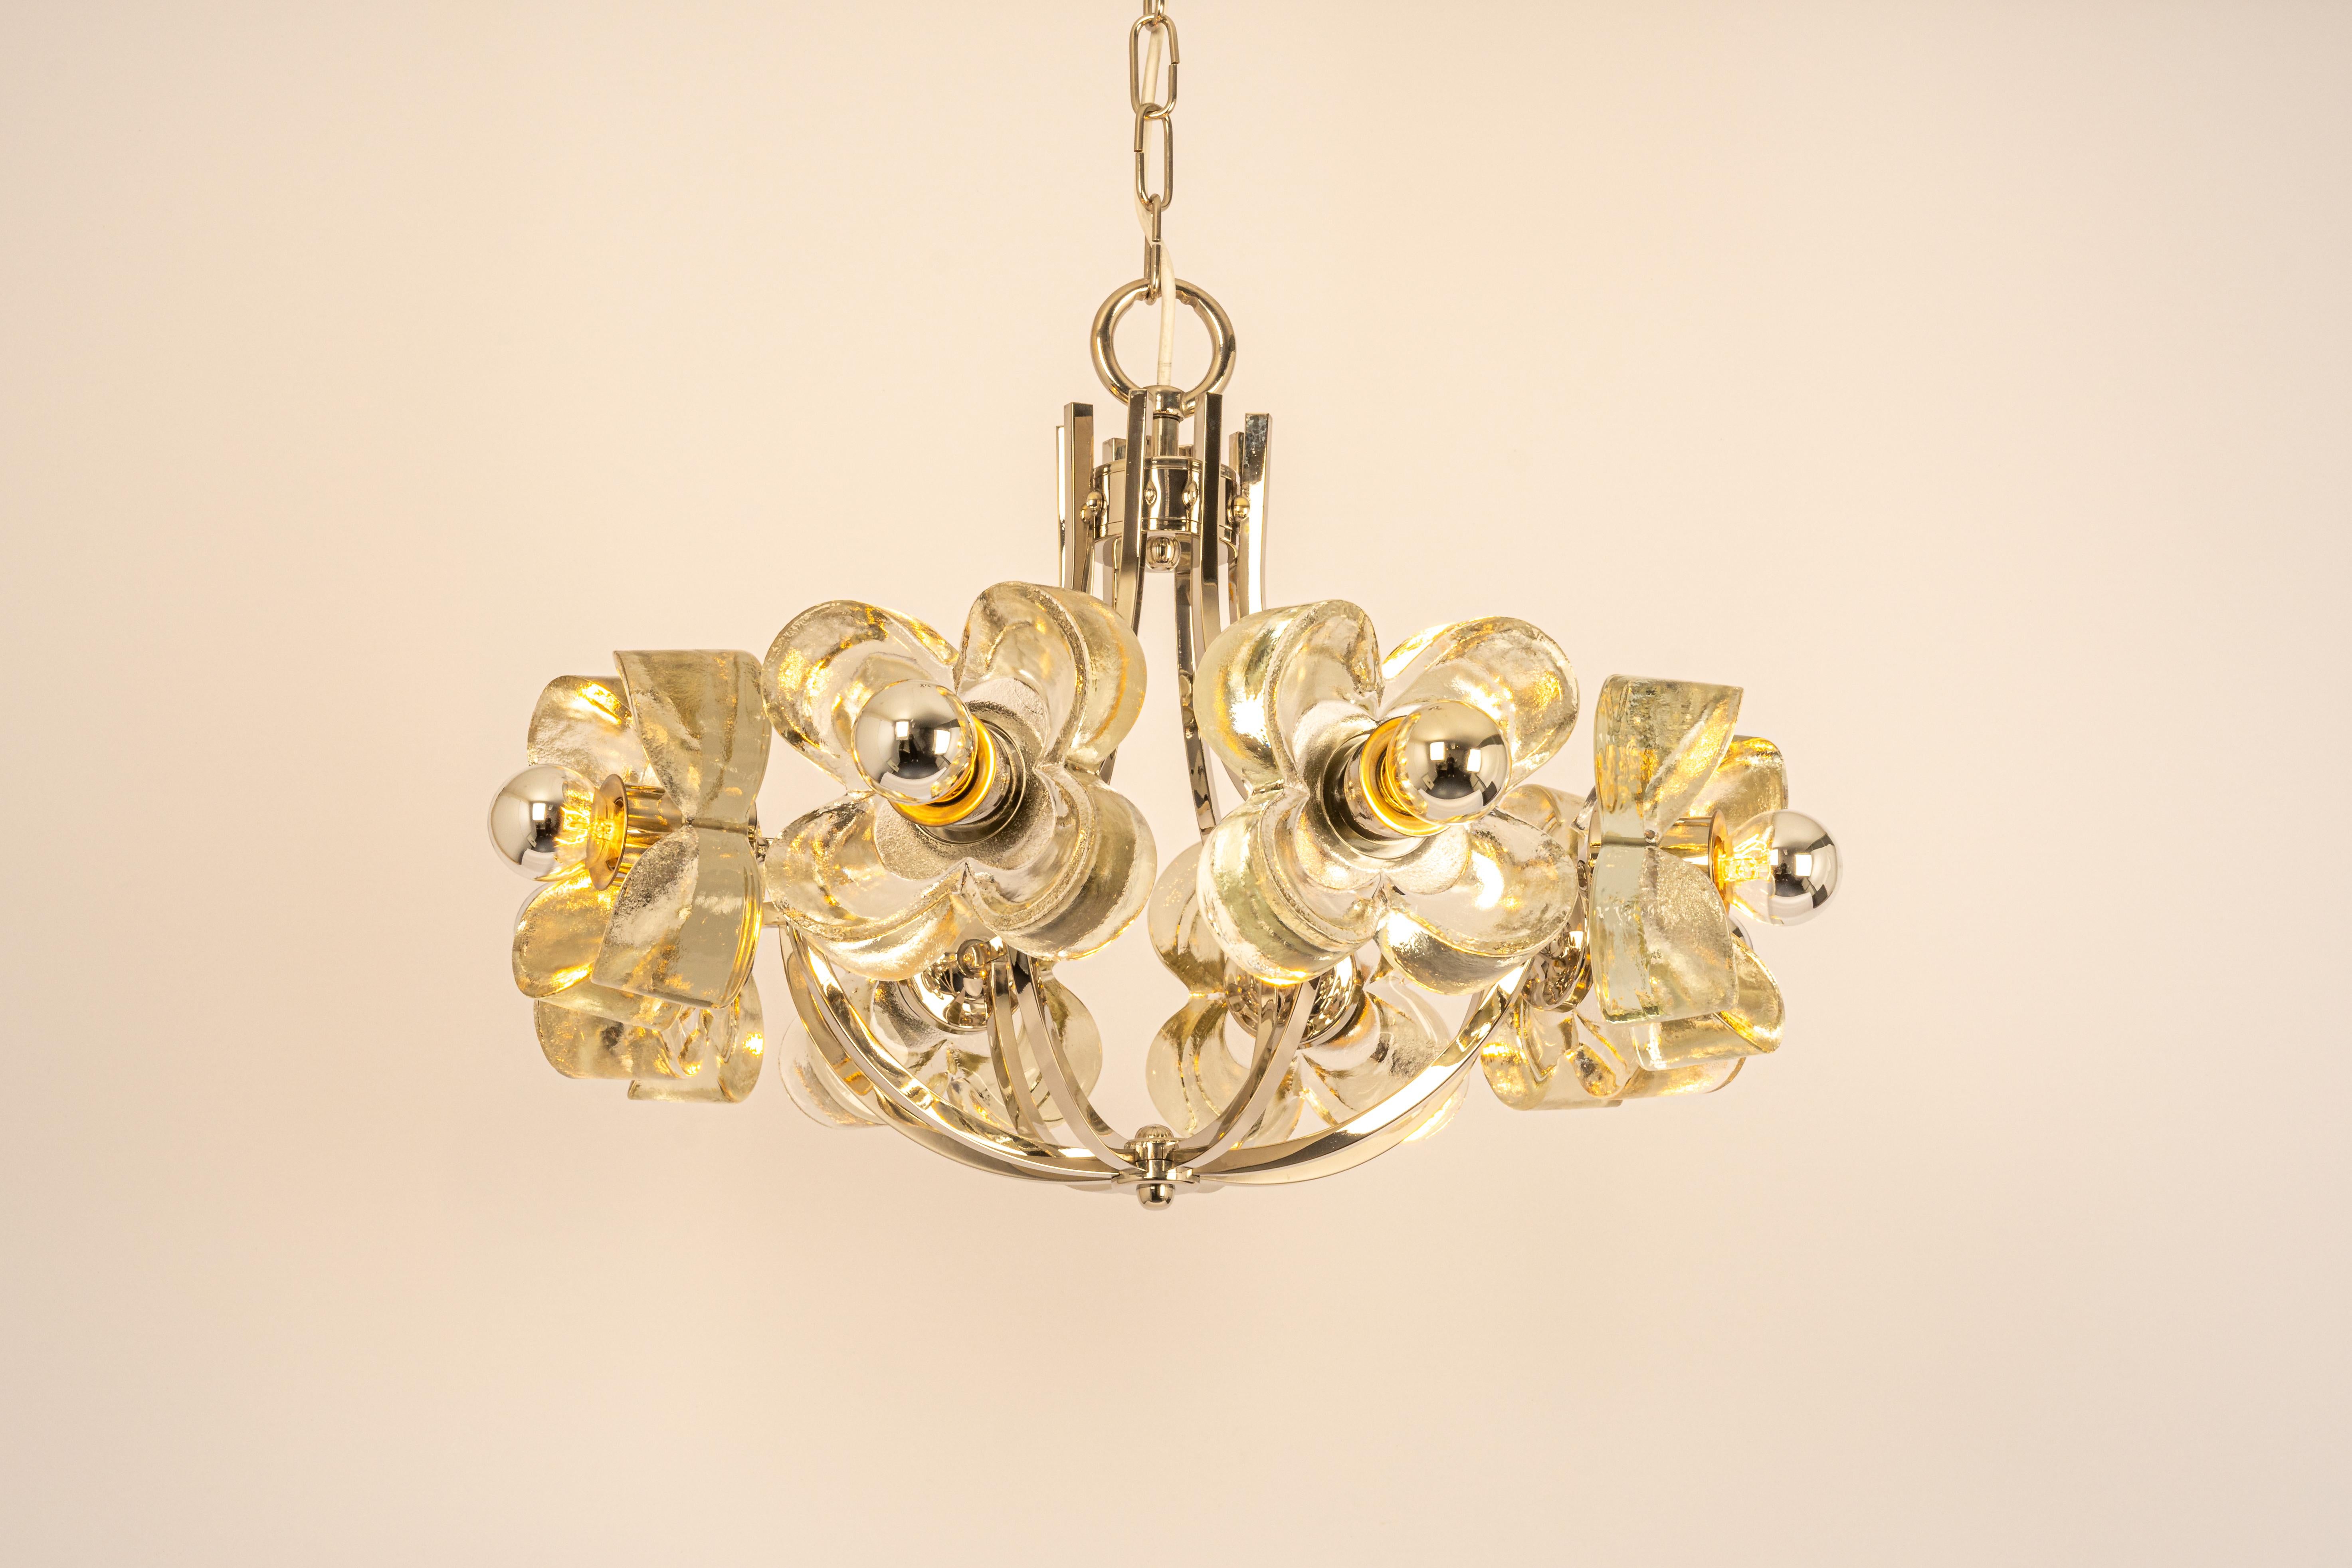 Large Chrome and Crystal Glass Pendant by Sische, Germany, 1970s For Sale 1